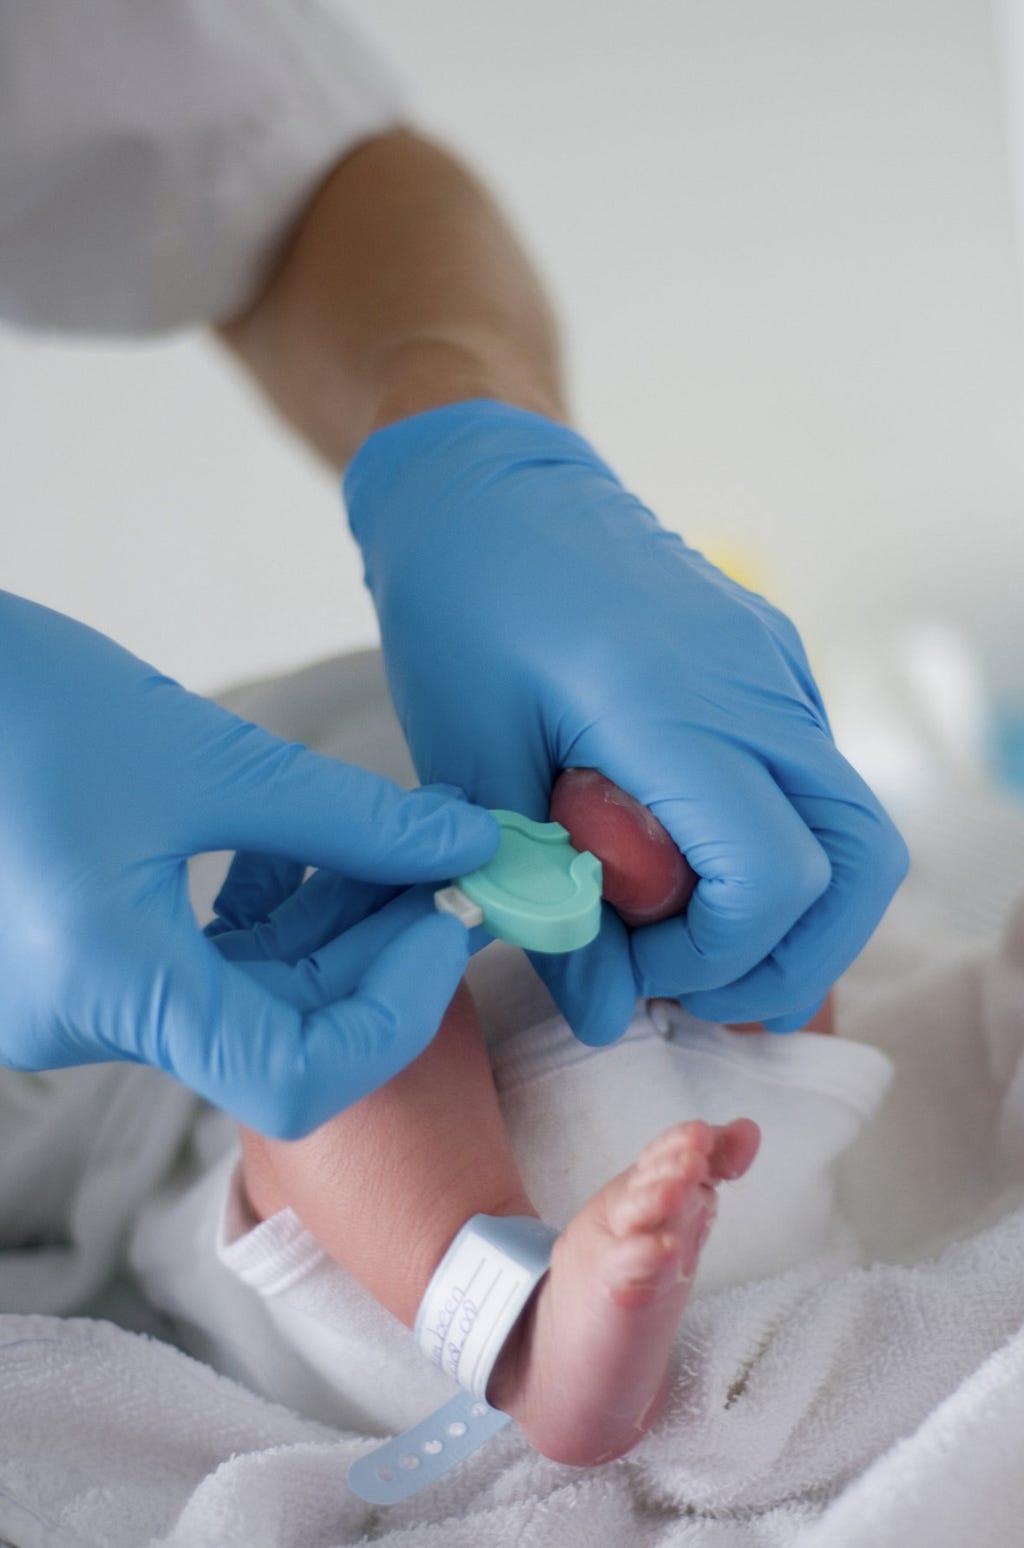 Two hands in blue medical gloves take a blood sample from a newborn’s heel.